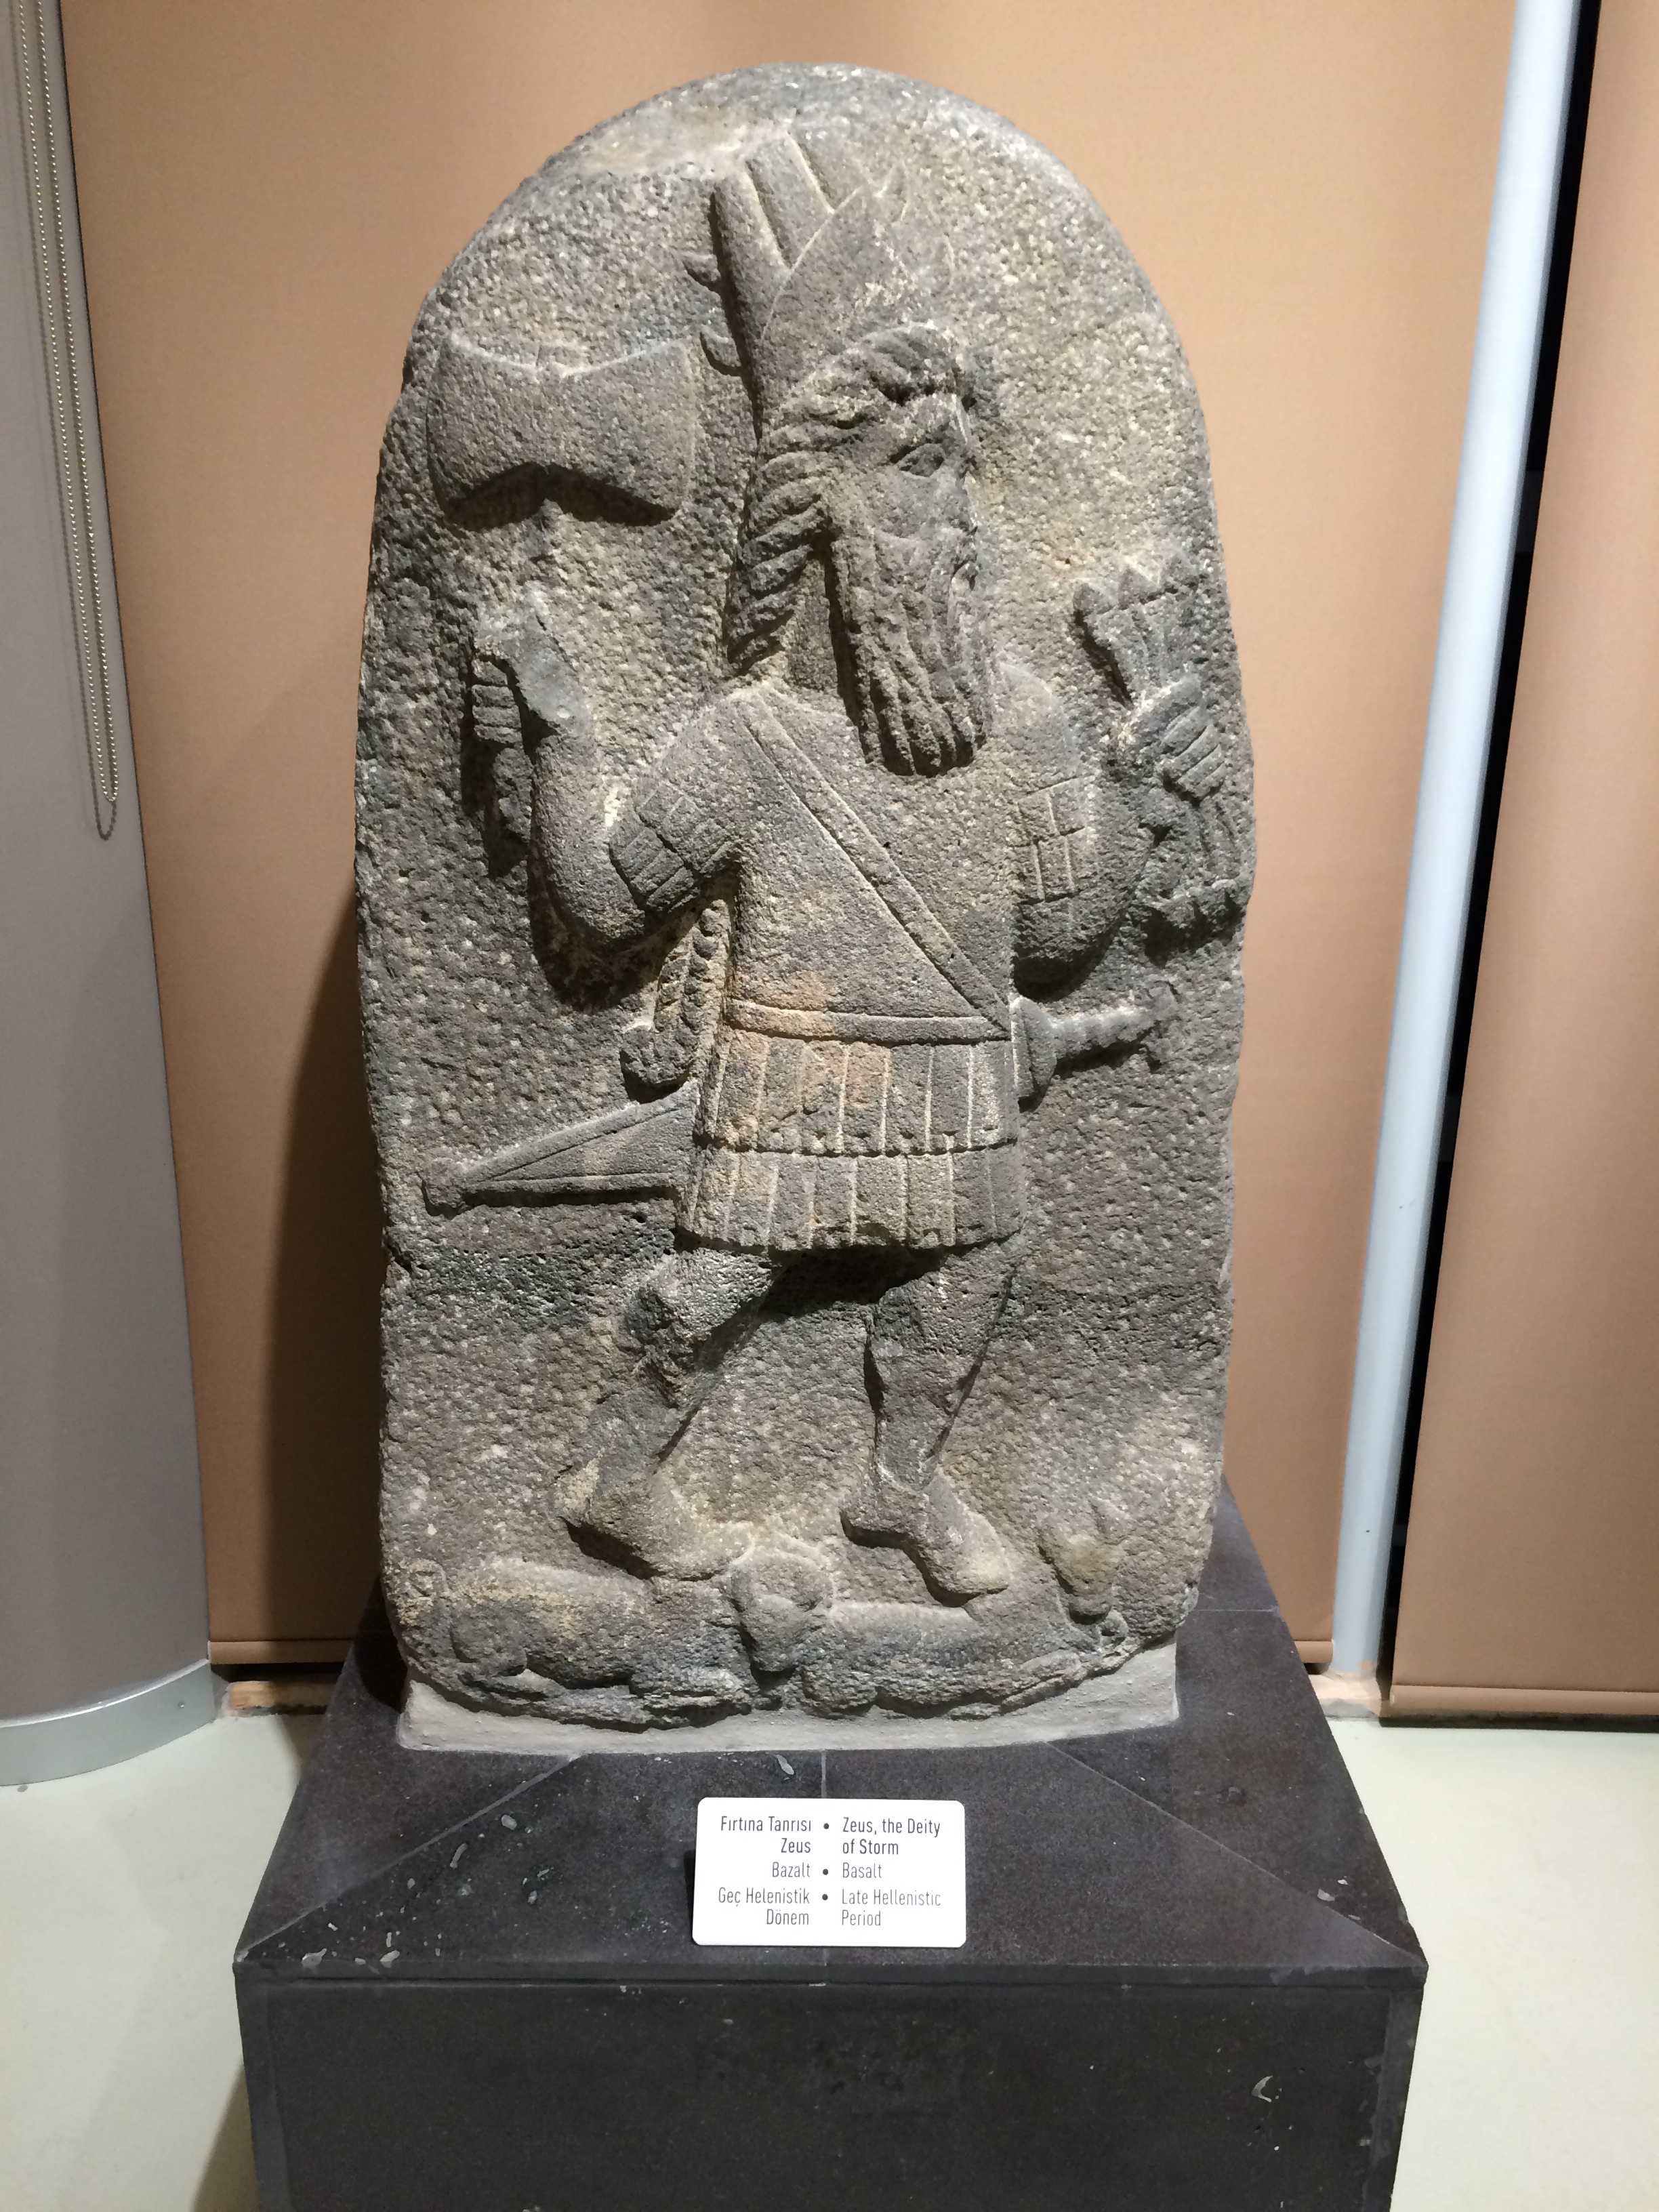 20 - Adad - Ishkur stele depicting him with alien high-tech weaponry; Adad was well known by most all ancient cultures for his high-tech weapons that sound like thunder & strike like lightning